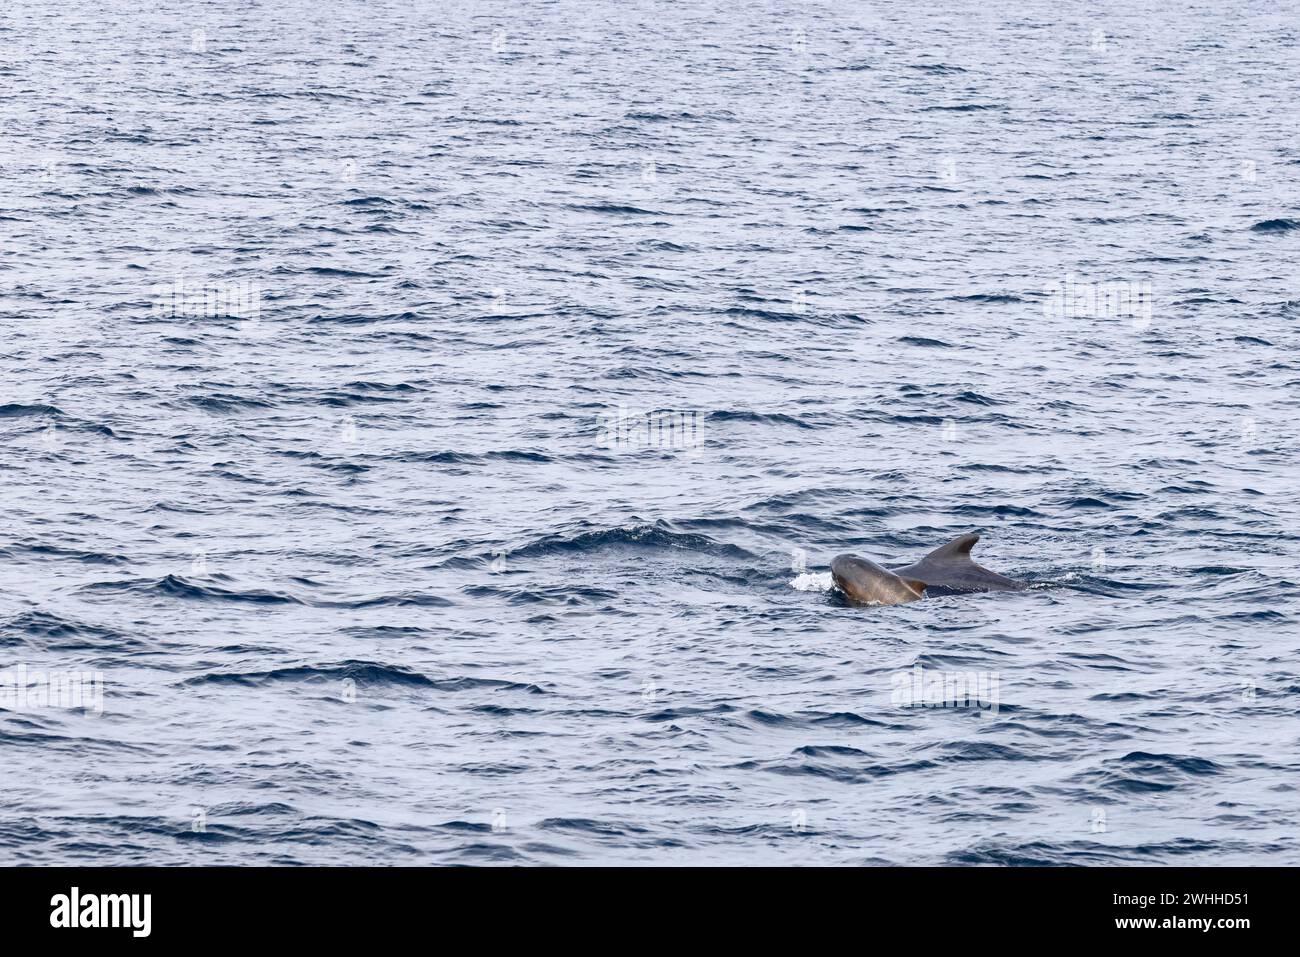 In the vast expanse of the northern ocean, a mother pilot whale accompanies her young, a snapshot of wildlife near the Arctic Circle Stock Photo